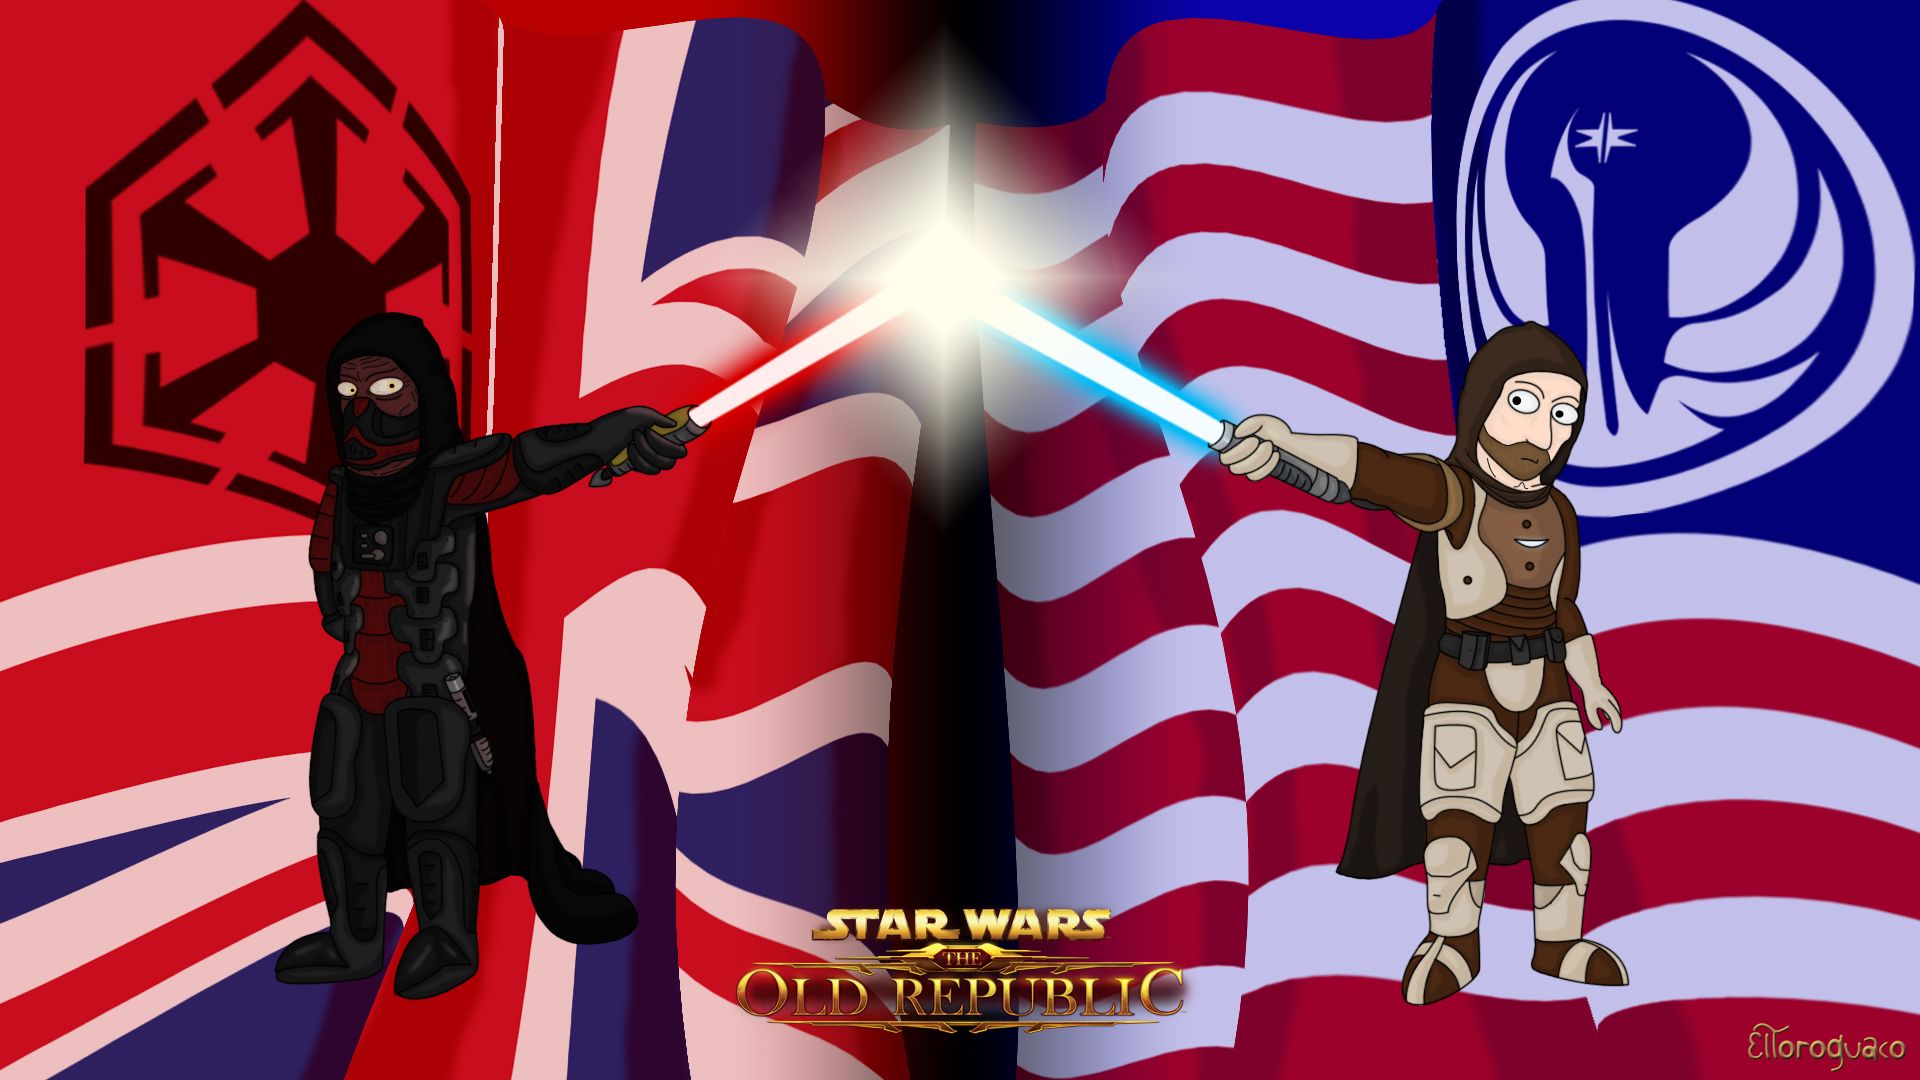 STAR WARS The Old Republic - swtor Faction Wallpaper comic style